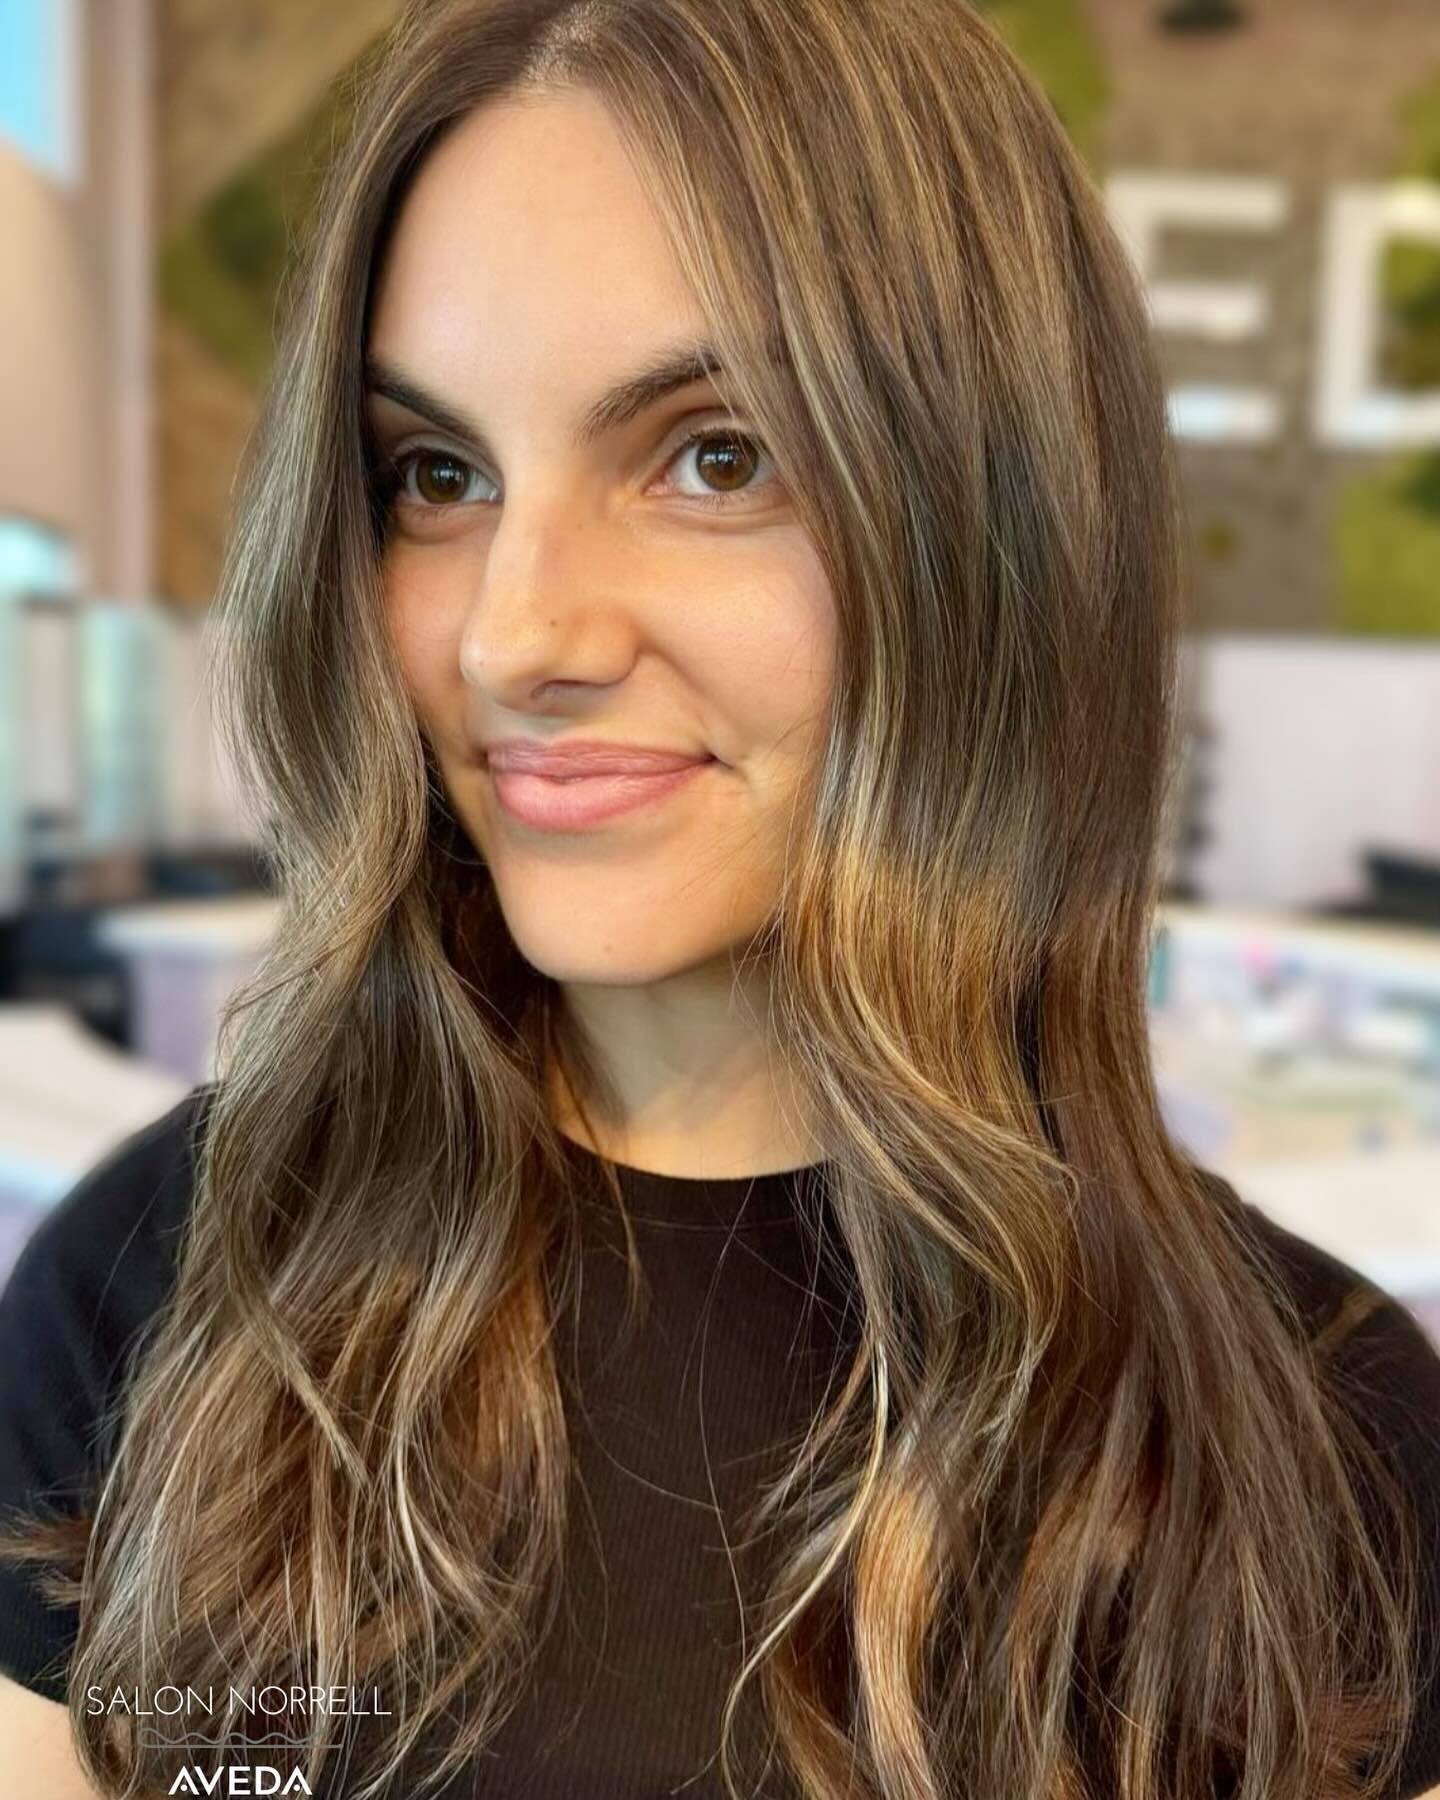 Hair | courtney 
Make your reservation today! 
🗓Reservations are best 
📲Text 813-590-6765 
☎️Call 813-265-2000 
🔗 Link in bio to book online 
💻TampaAveda.com 
📍Tampa, Florida 
🏷 tag us #salonnorrell